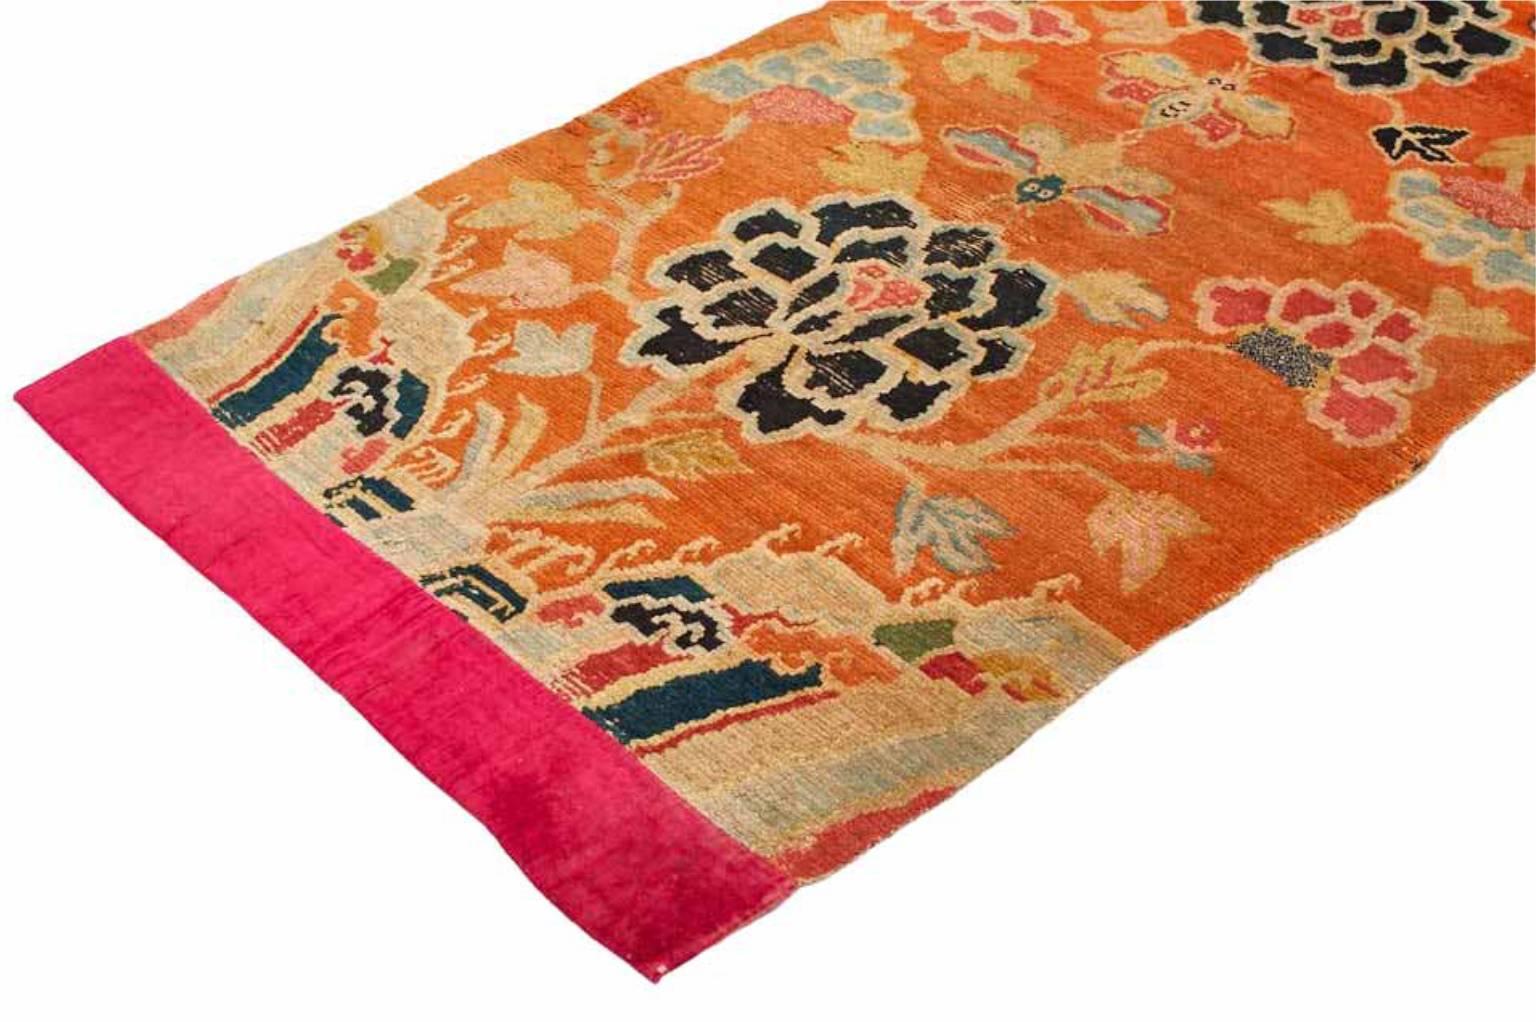 Individually selected by Madeline during her travels, this handwoven vintage Tibetan wool rug features lotus florals emerging from a saturated field. This distinctive palette of orange, pink, ivory, and navy hues emphasize the exotic beauty of this